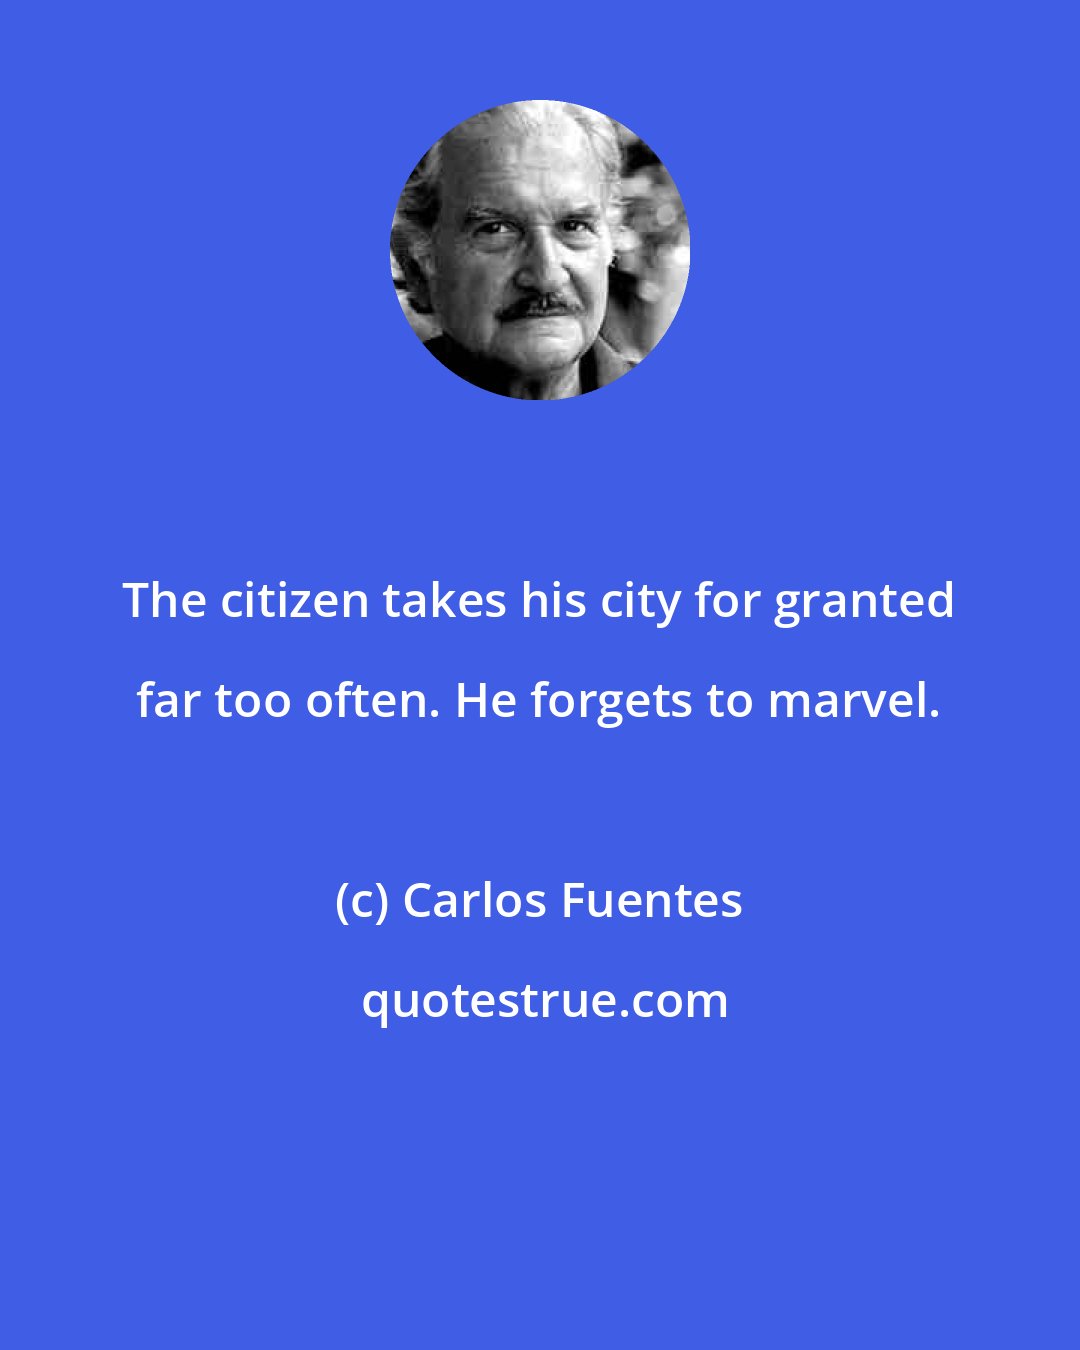 Carlos Fuentes: The citizen takes his city for granted far too often. He forgets to marvel.